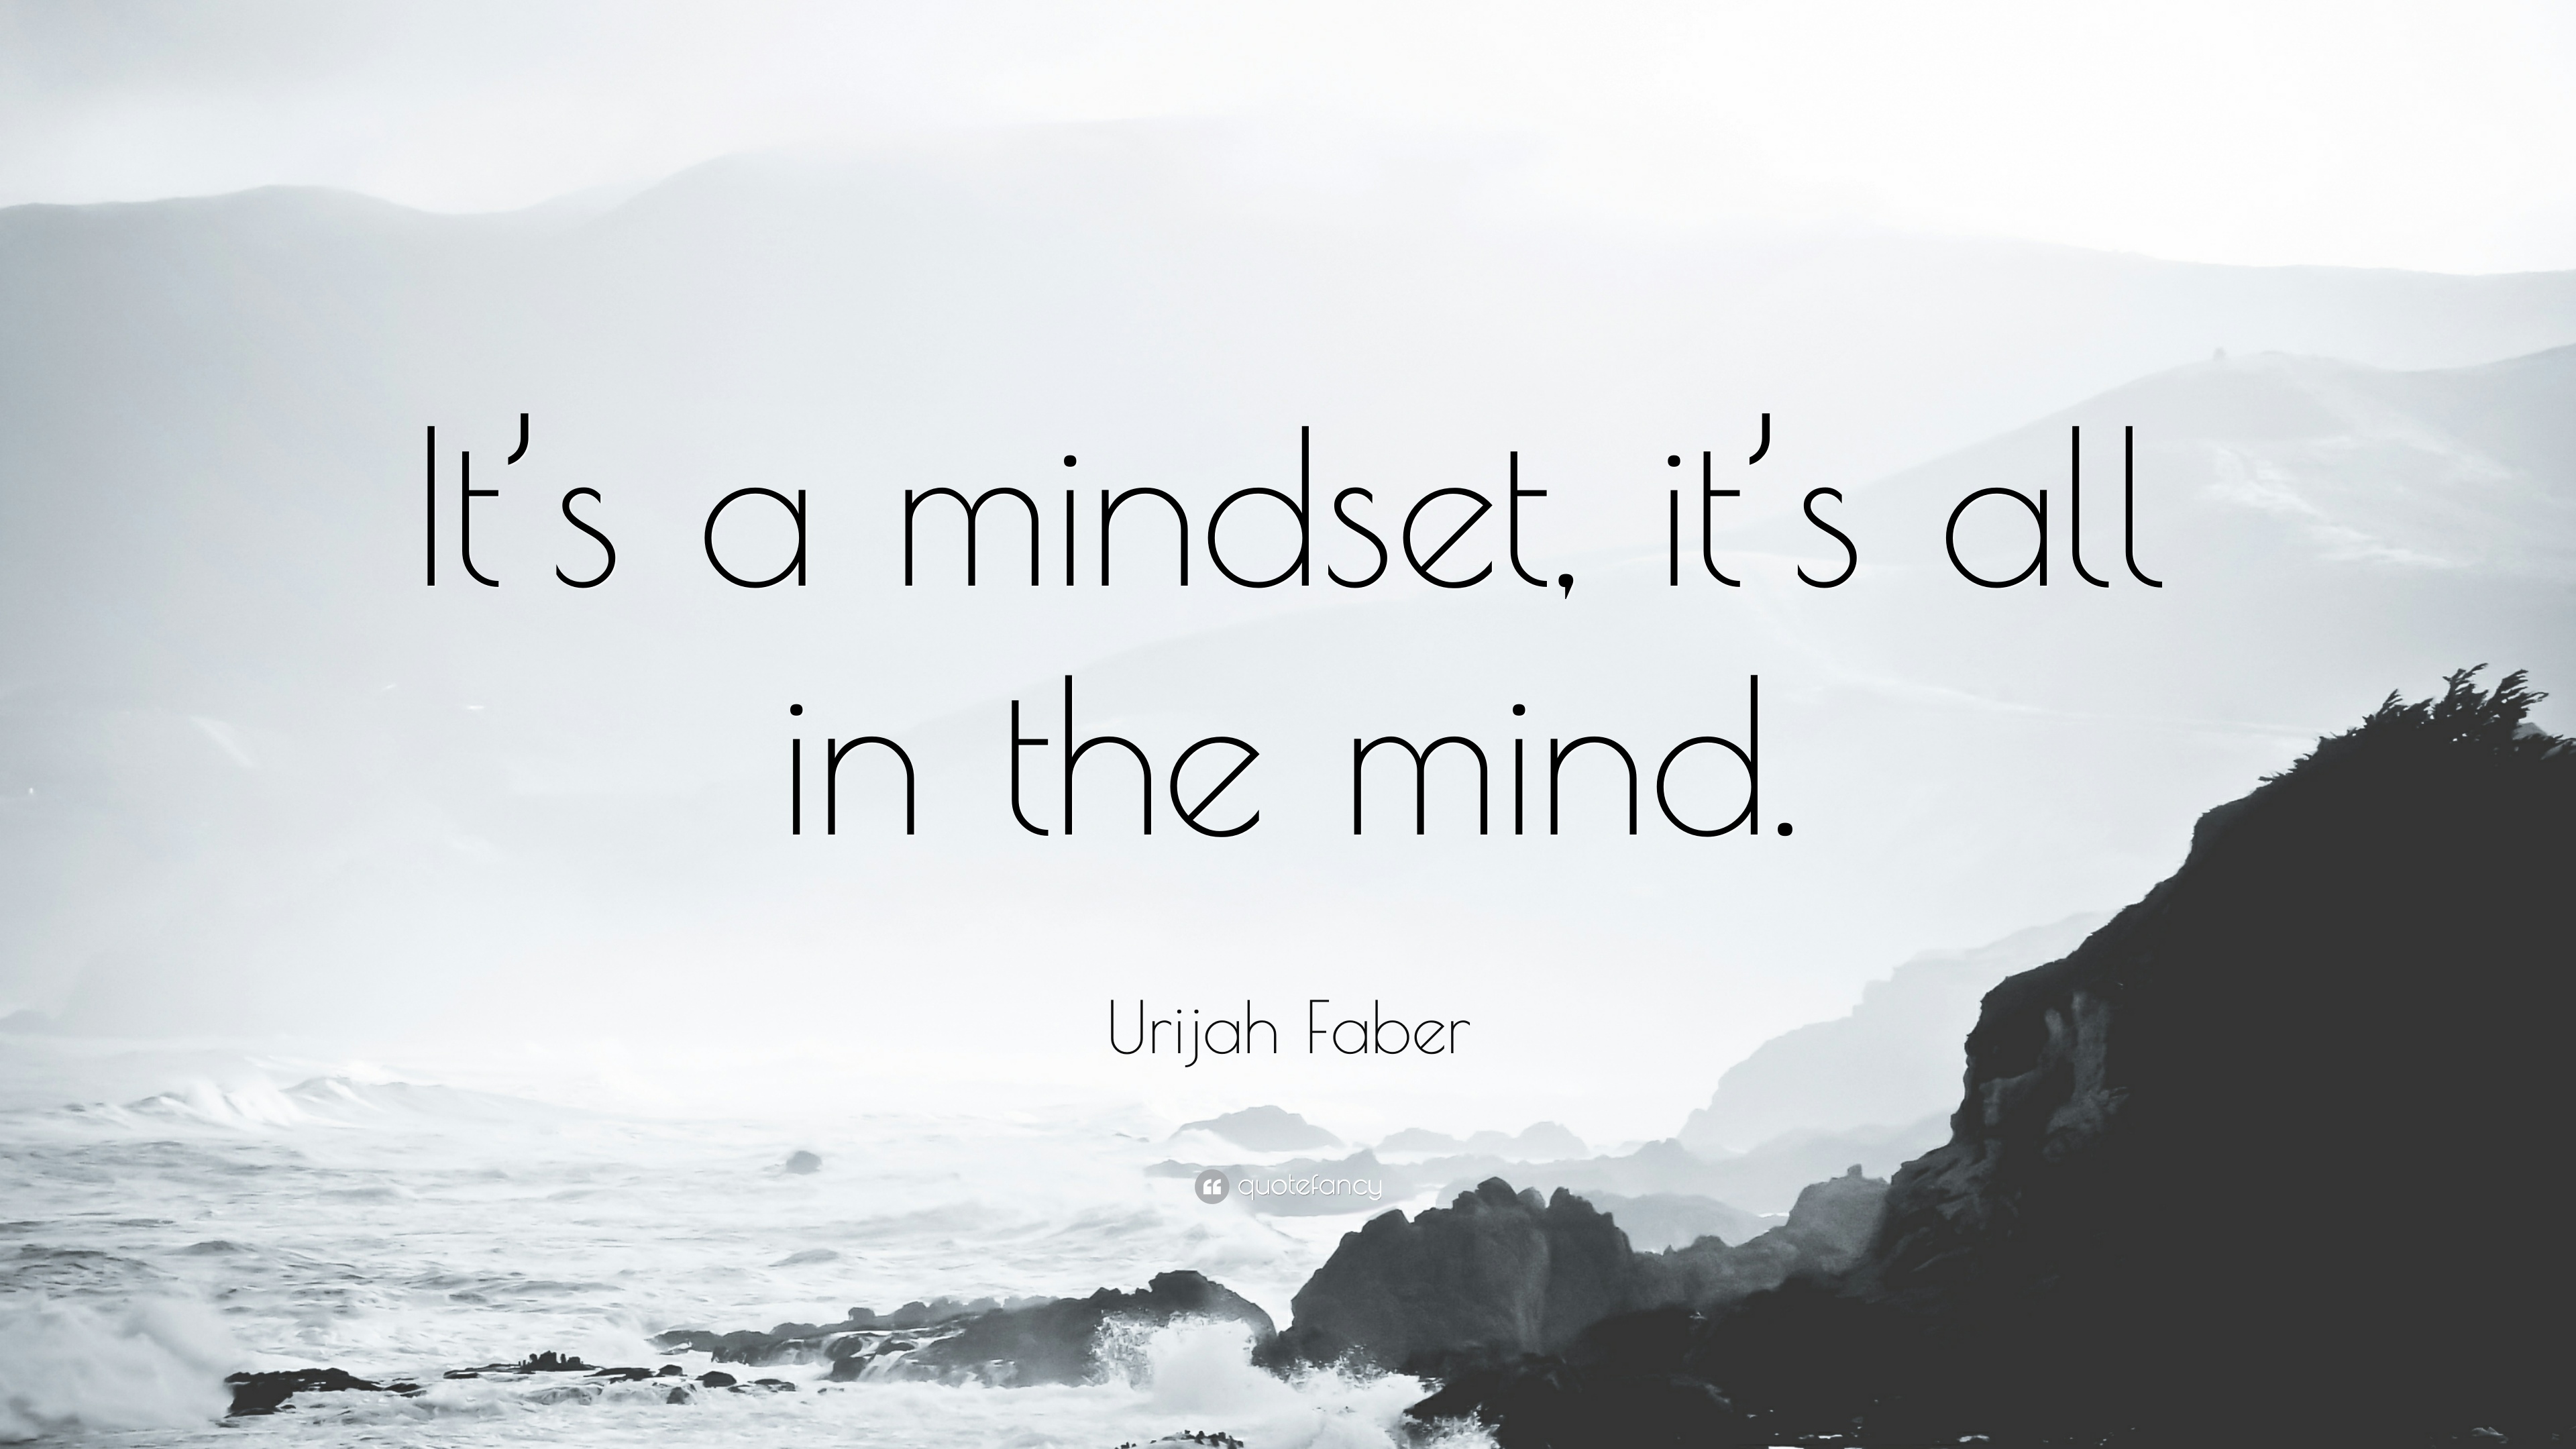 Urijah Faber Quote: “It's a mindset, it's all in the mind.”